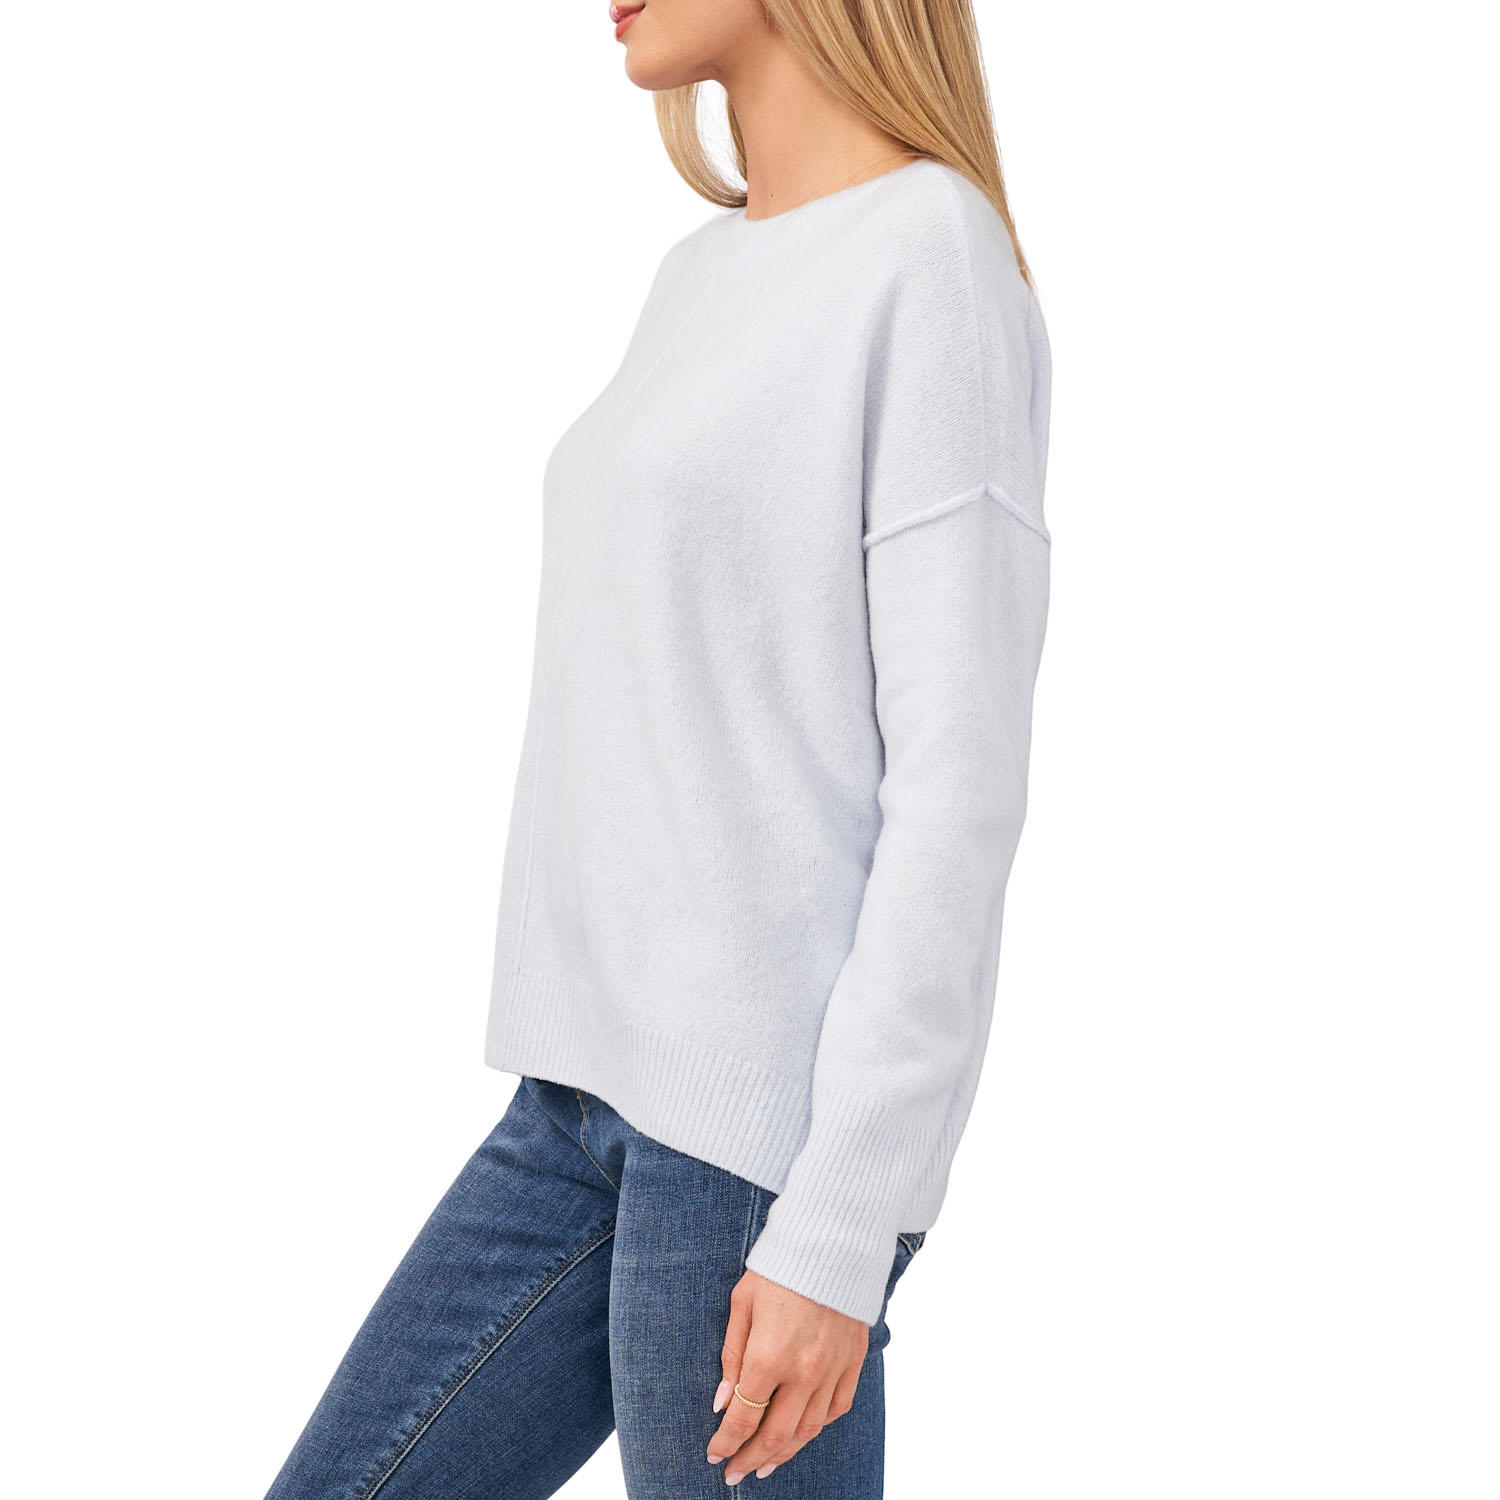 Sam's Club Members: Women's Vince Camuto Center Seam Crewneck Sweater (Frozen) $4.81 + Free S&H for Plus Members